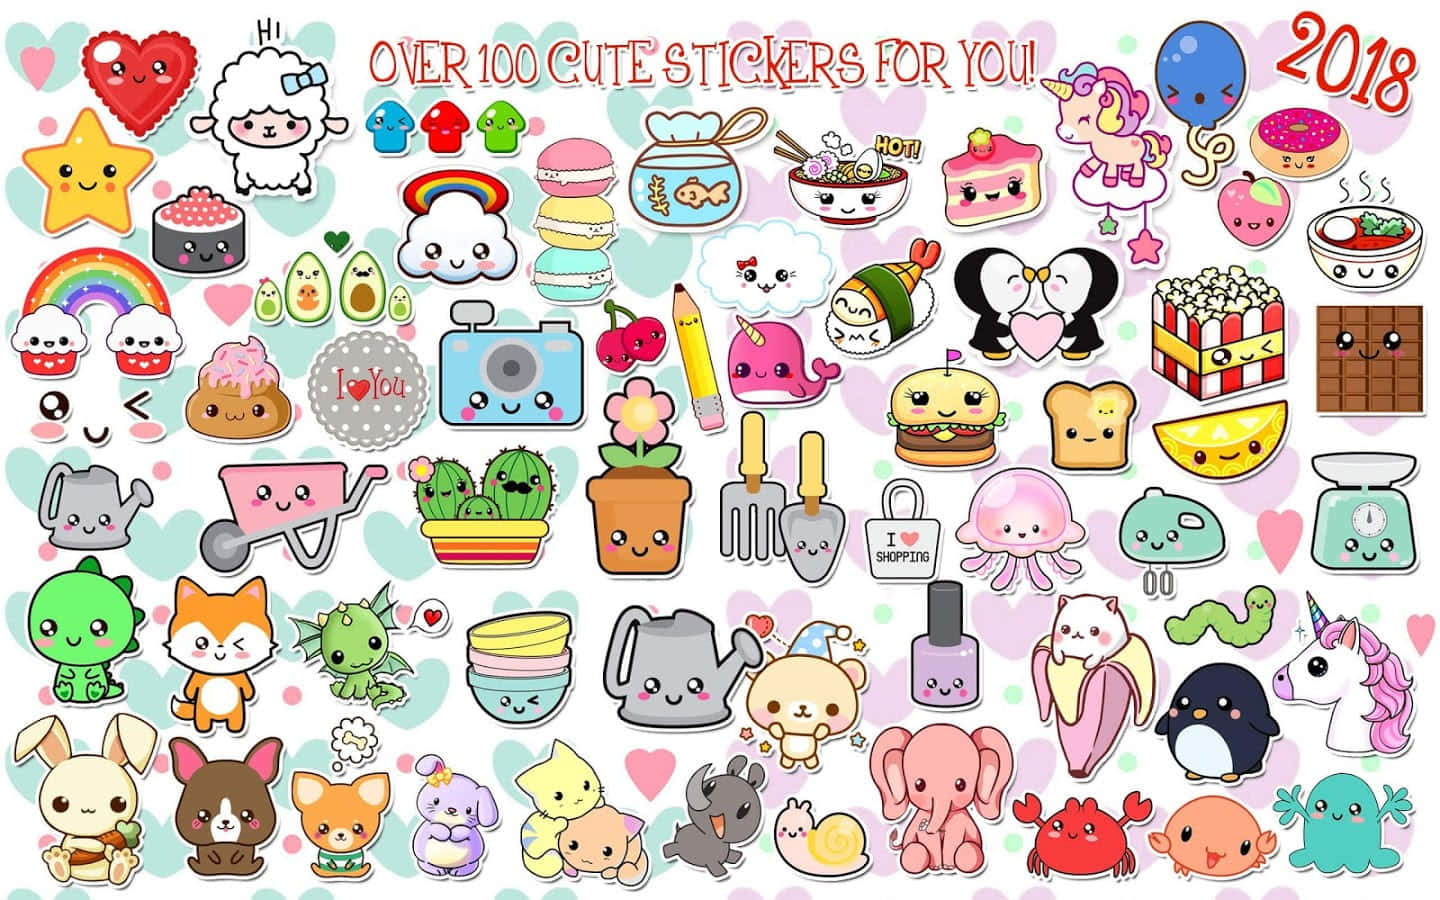 Adorable Assortment of Cute Stickers Wallpaper